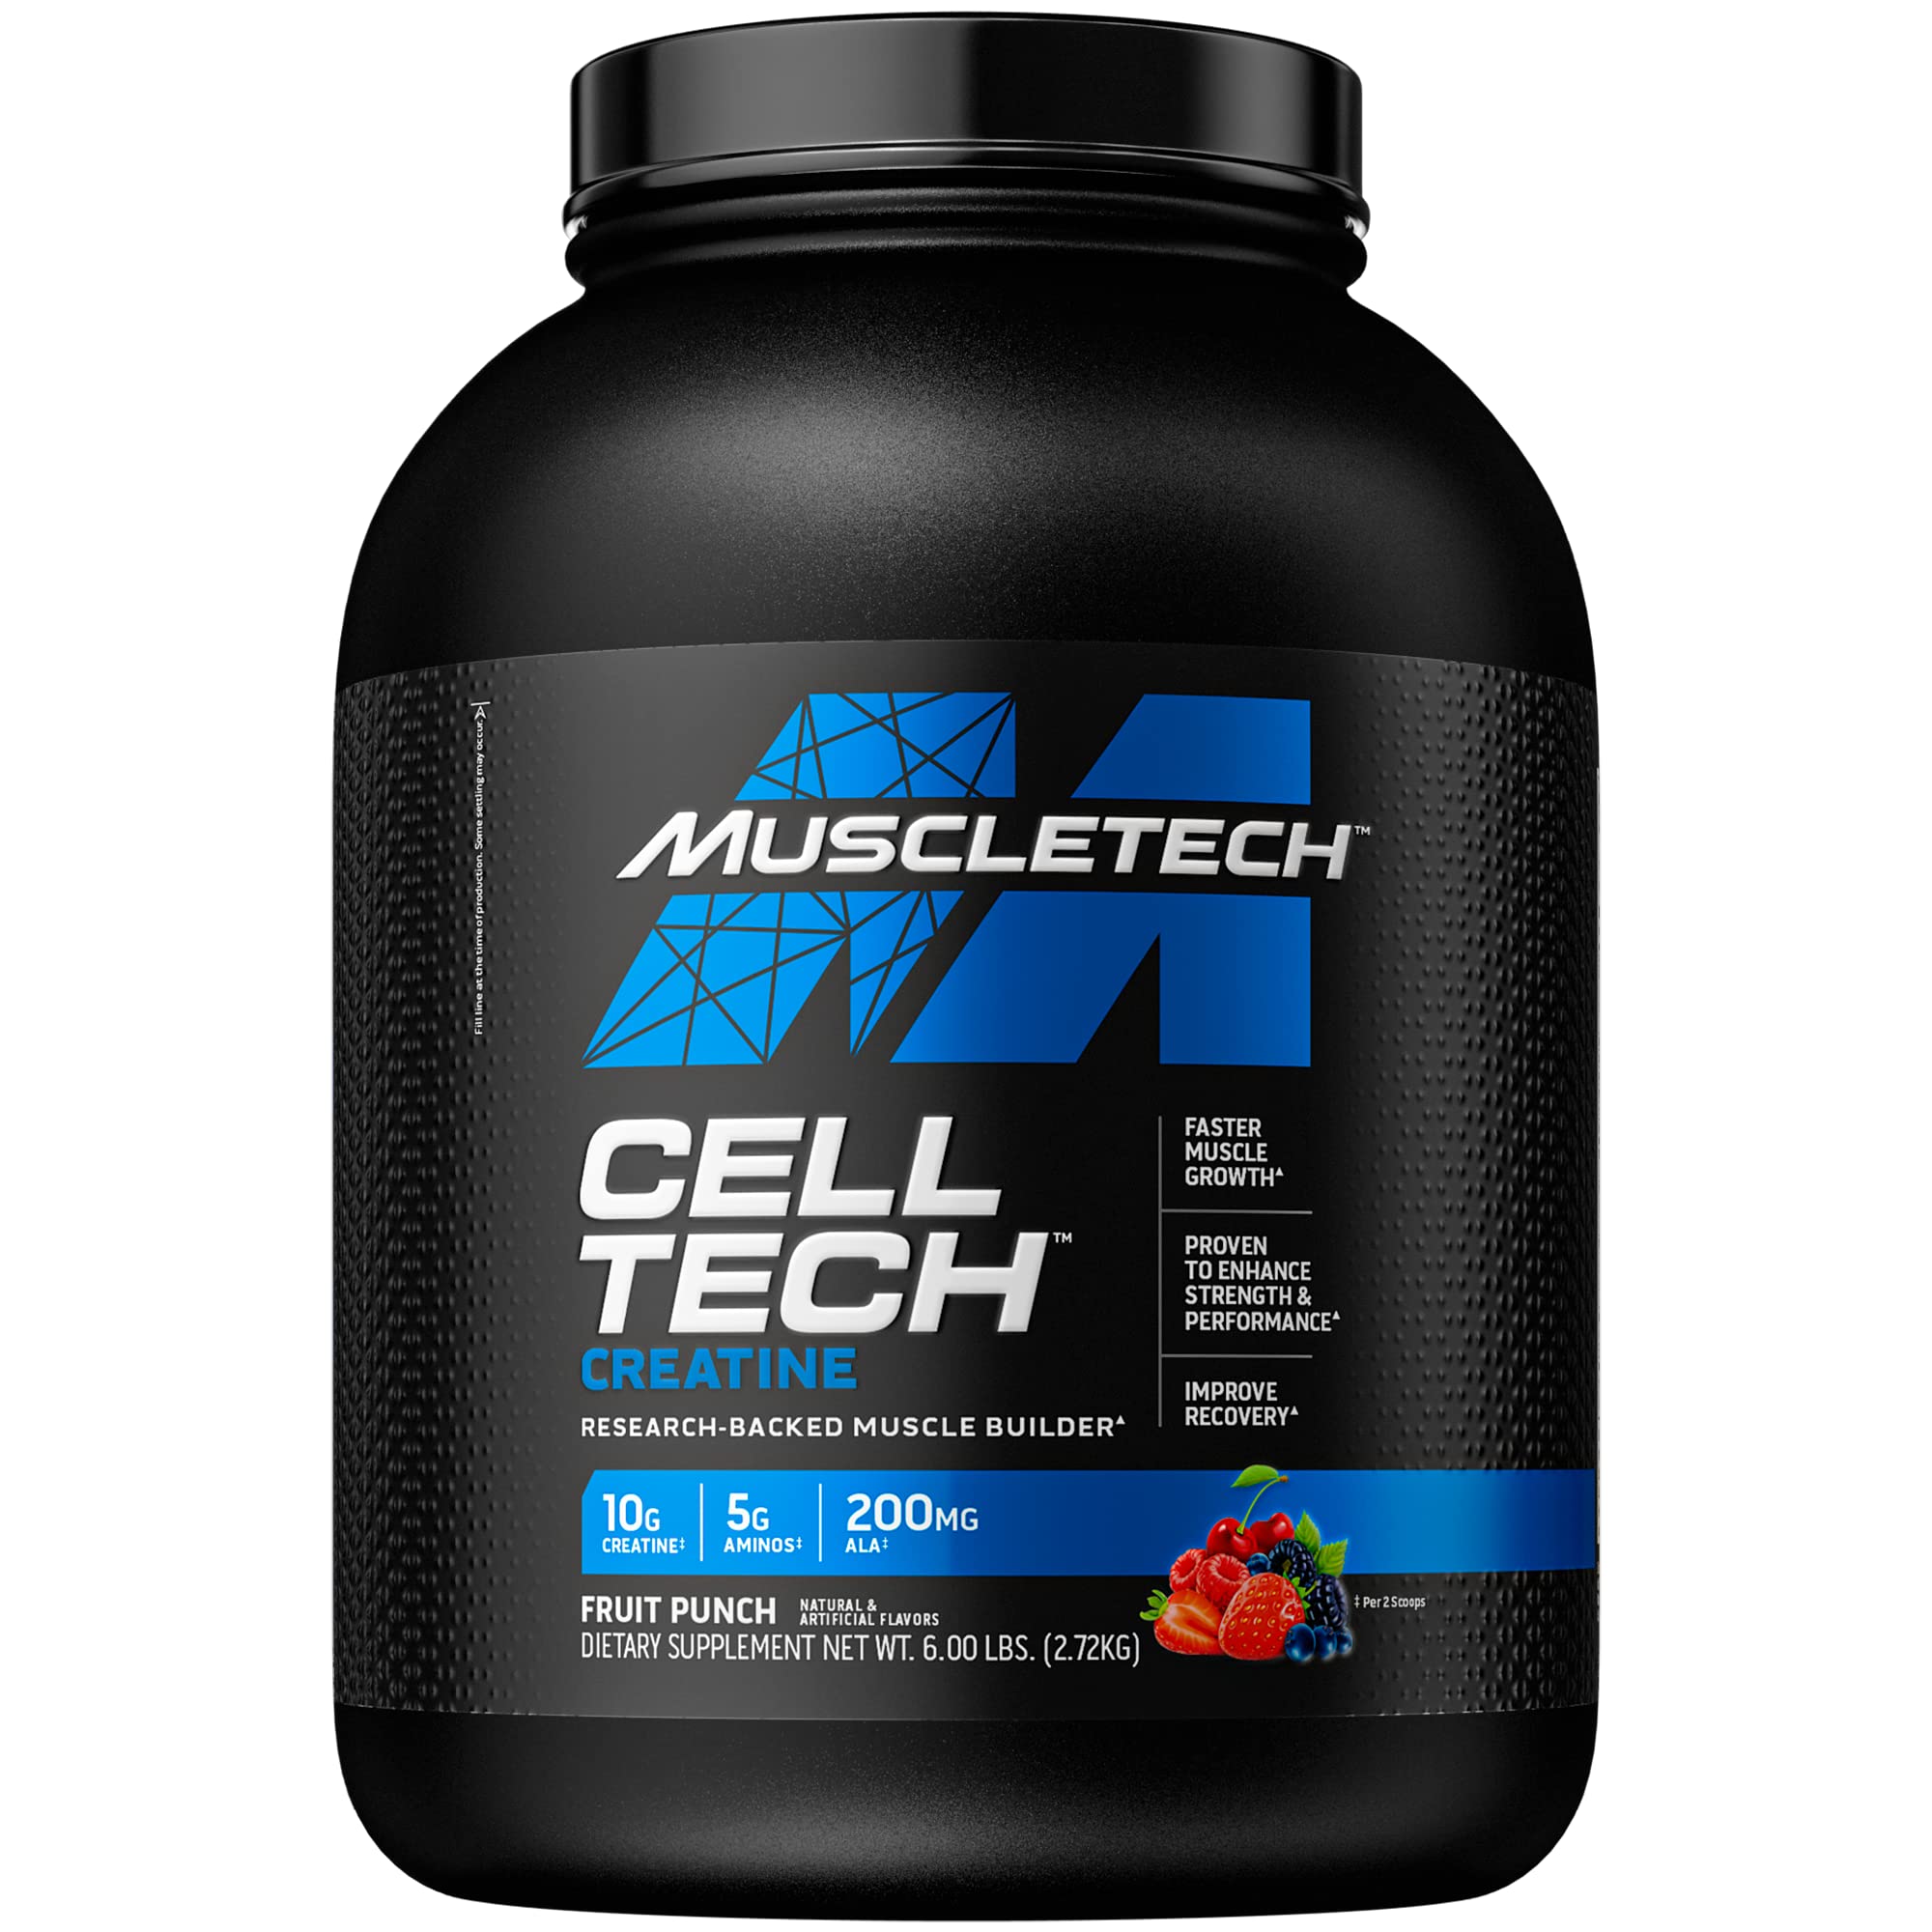 MuscleTech Creatine Monohydrate Powder Cell-Tech Creatine Powder & n Powder Nitro-Tech Whey Protein Isolate & Peptides | Milk Chocolate, 4 Pound (Pack of 1), 40 Servings